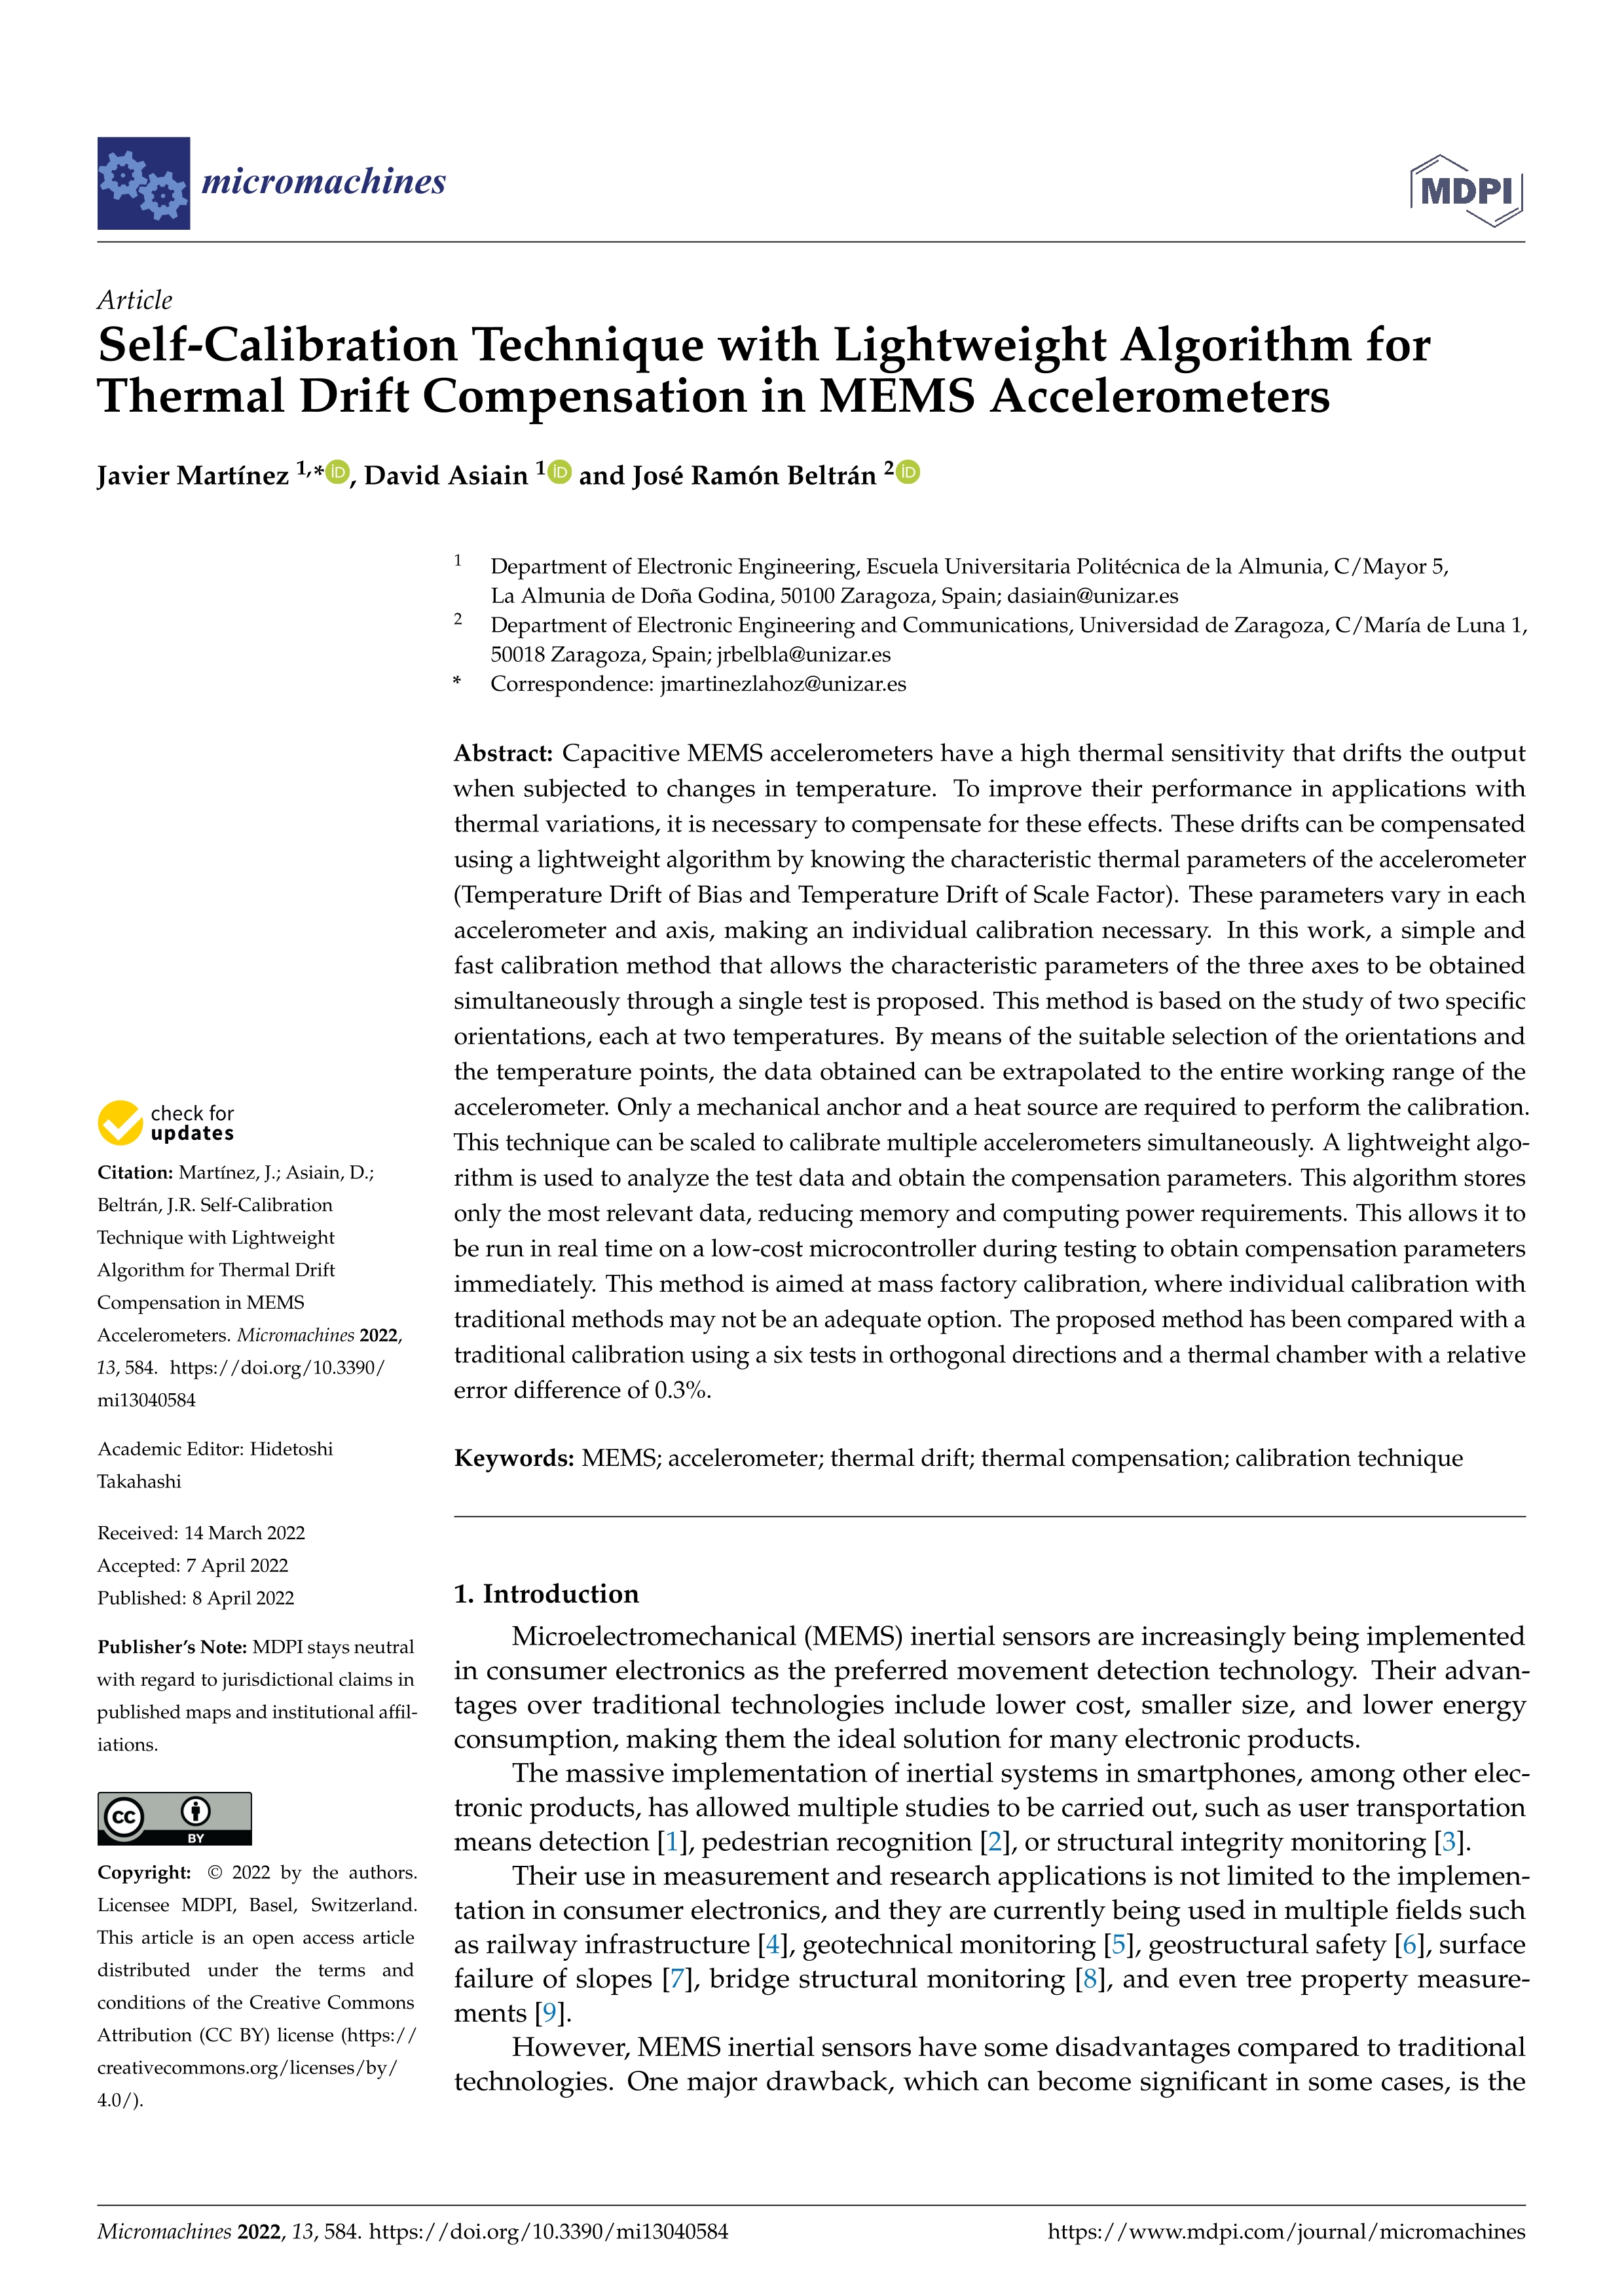 Self-Calibration Technique with Lightweight Algorithm for Thermal Drift Compensation in MEMS Accelerometers